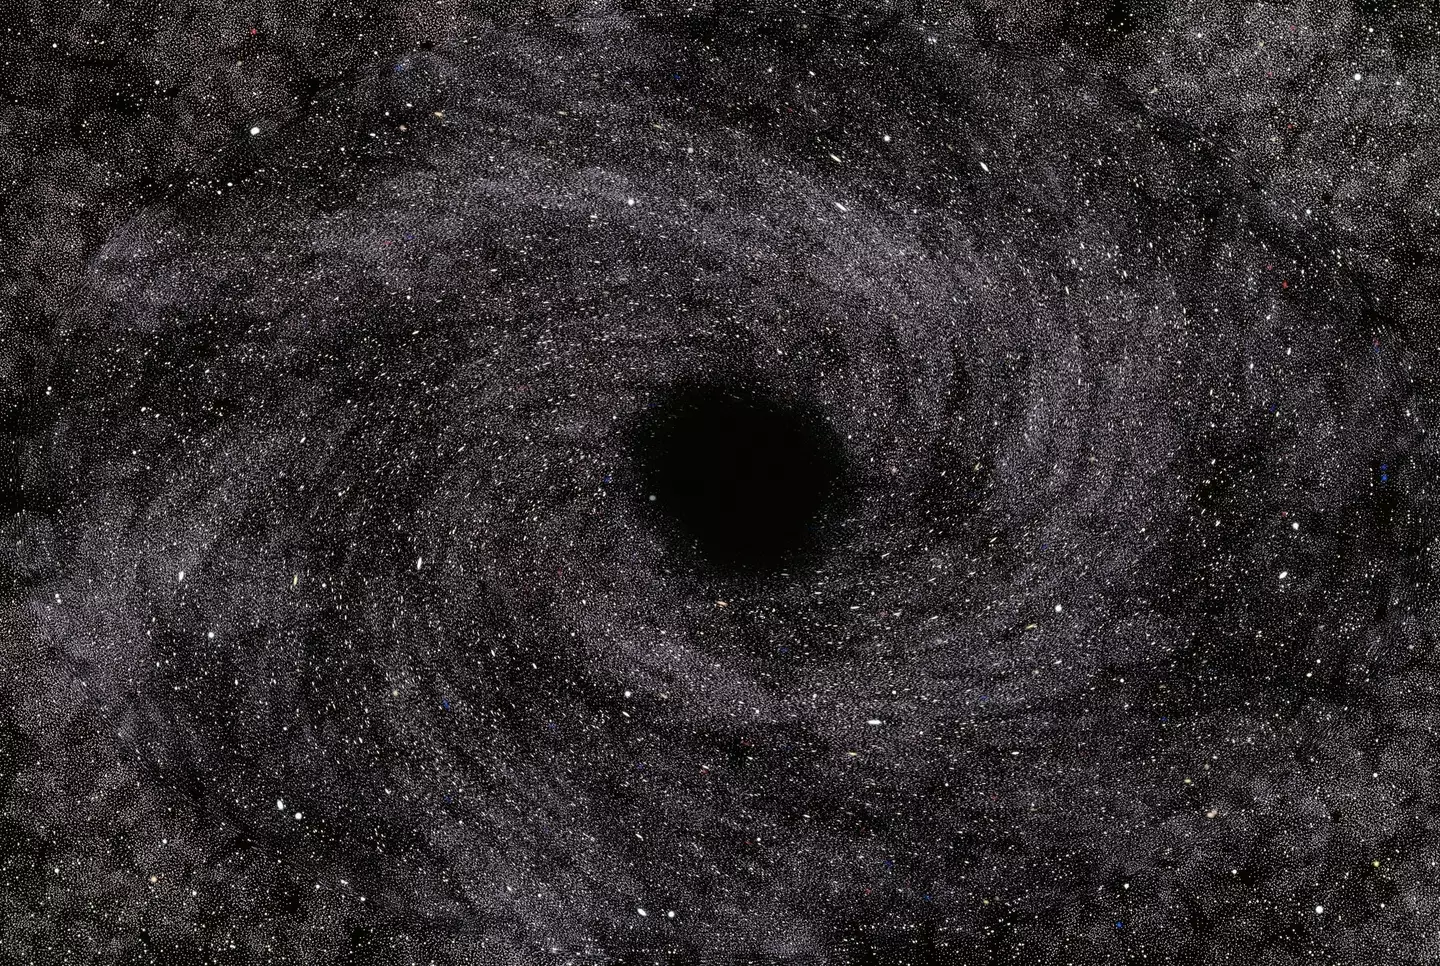 Scientists simulated a black hole.